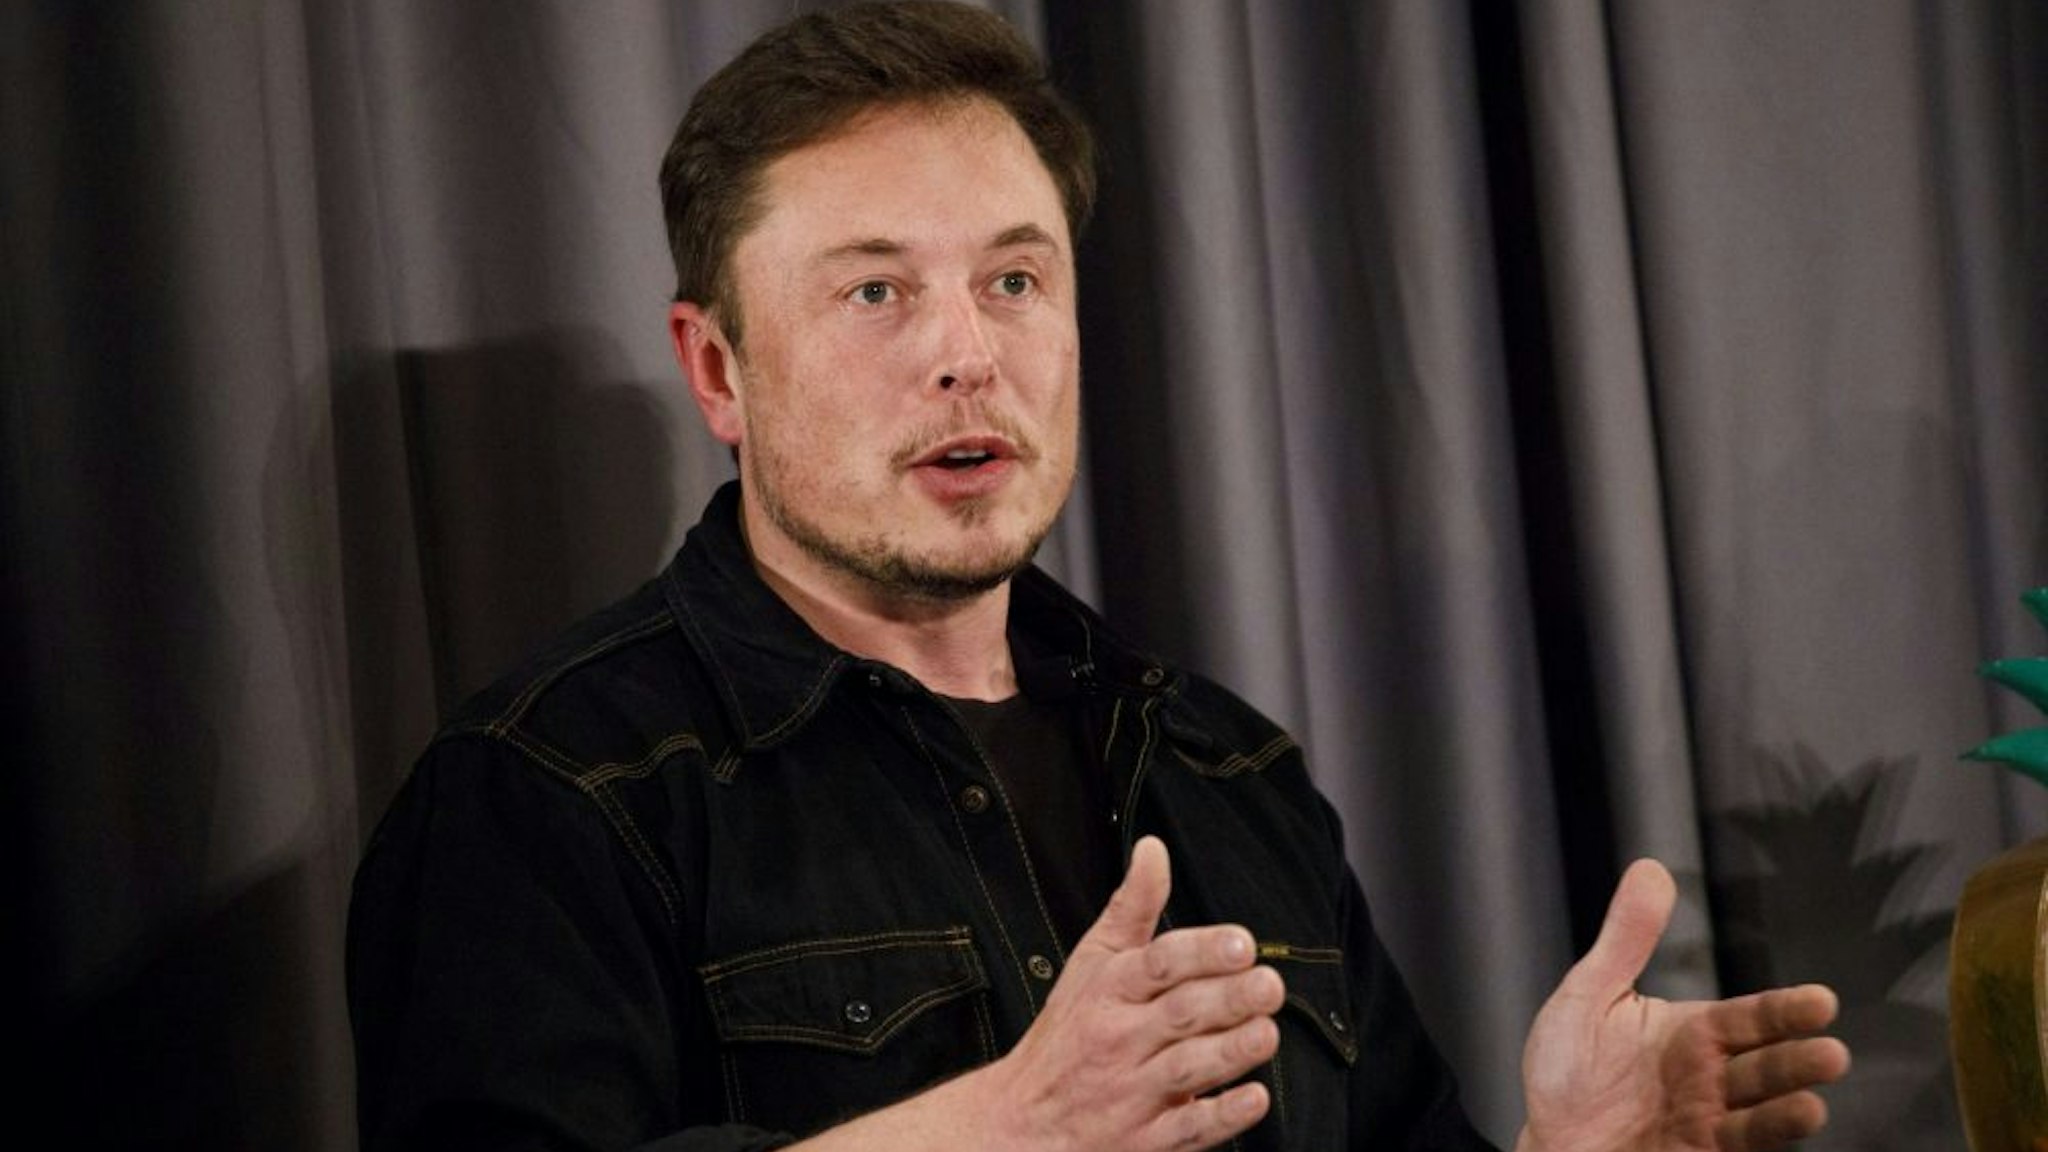 Elon Musk, co-founder and chief executive officer of Tesla Inc., speaks during a Boring Co. event in Los Angeles, California, U.S., on Thursday, May 17, 2018. Closely held SpaceX is going to build its next rocket, known as BFR, at the Port of Los Angeles, an area Musk envisions people getting to using a Boring loop -- if the city approves the idea.